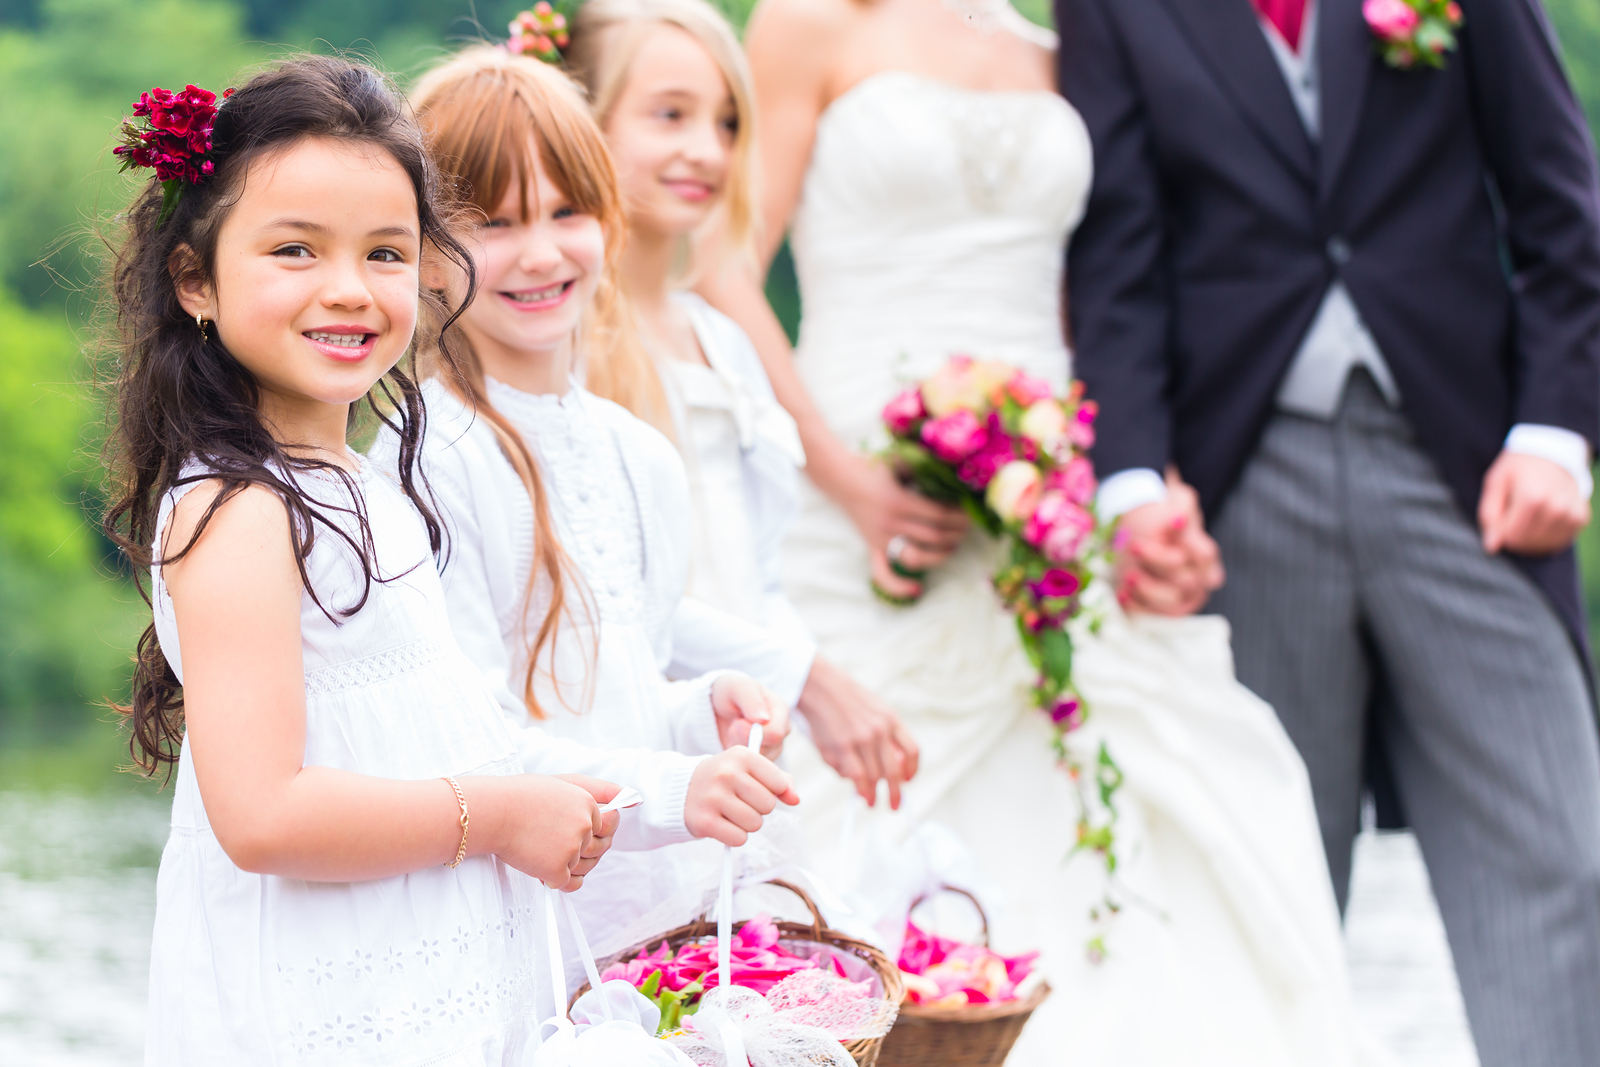 Remarrying? Protect Your Children With a Prenup | Schultz Family Law